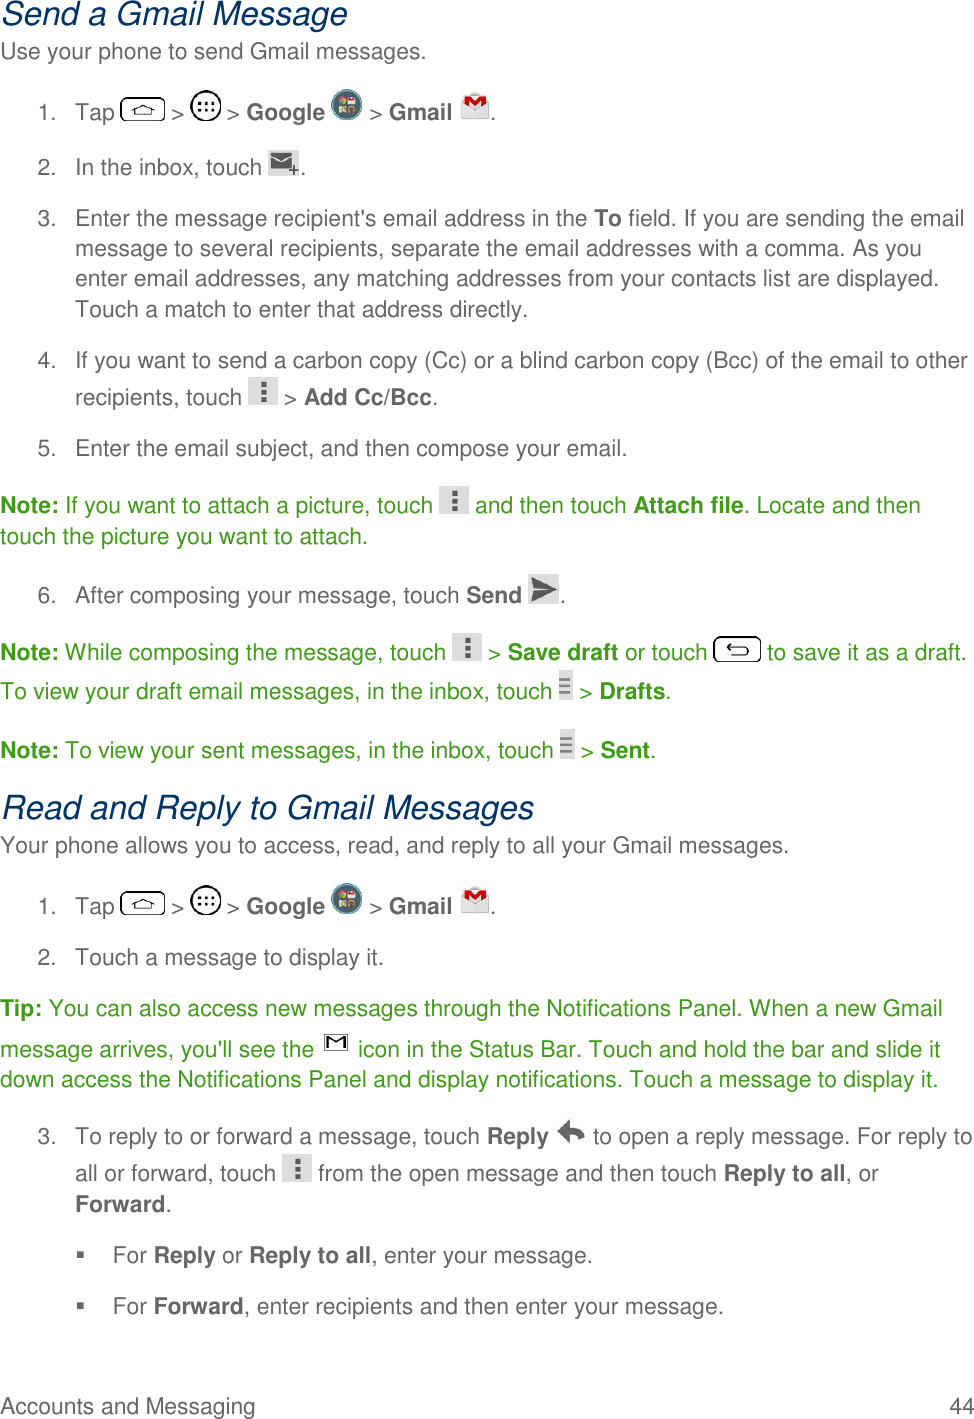 Accounts and Messaging  44 Send a Gmail Message Use your phone to send Gmail messages. 1.  Tap   &gt;   &gt; Google   &gt; Gmail  . 2.  In the inbox, touch  . 3.  Enter the message recipient&apos;s email address in the To field. If you are sending the email message to several recipients, separate the email addresses with a comma. As you enter email addresses, any matching addresses from your contacts list are displayed. Touch a match to enter that address directly. 4.  If you want to send a carbon copy (Cc) or a blind carbon copy (Bcc) of the email to other recipients, touch   &gt; Add Cc/Bcc. 5.  Enter the email subject, and then compose your email. Note: If you want to attach a picture, touch   and then touch Attach file. Locate and then touch the picture you want to attach. 6.  After composing your message, touch Send  . Note: While composing the message, touch   &gt; Save draft or touch   to save it as a draft. To view your draft email messages, in the inbox, touch   &gt; Drafts. Note: To view your sent messages, in the inbox, touch   &gt; Sent. Read and Reply to Gmail Messages Your phone allows you to access, read, and reply to all your Gmail messages. 1.  Tap   &gt;   &gt; Google   &gt; Gmail  . 2.  Touch a message to display it. Tip: You can also access new messages through the Notifications Panel. When a new Gmail message arrives, you&apos;ll see the   icon in the Status Bar. Touch and hold the bar and slide it down access the Notifications Panel and display notifications. Touch a message to display it.  3.  To reply to or forward a message, touch Reply   to open a reply message. For reply to all or forward, touch   from the open message and then touch Reply to all, or Forward.   For Reply or Reply to all, enter your message.   For Forward, enter recipients and then enter your message. 